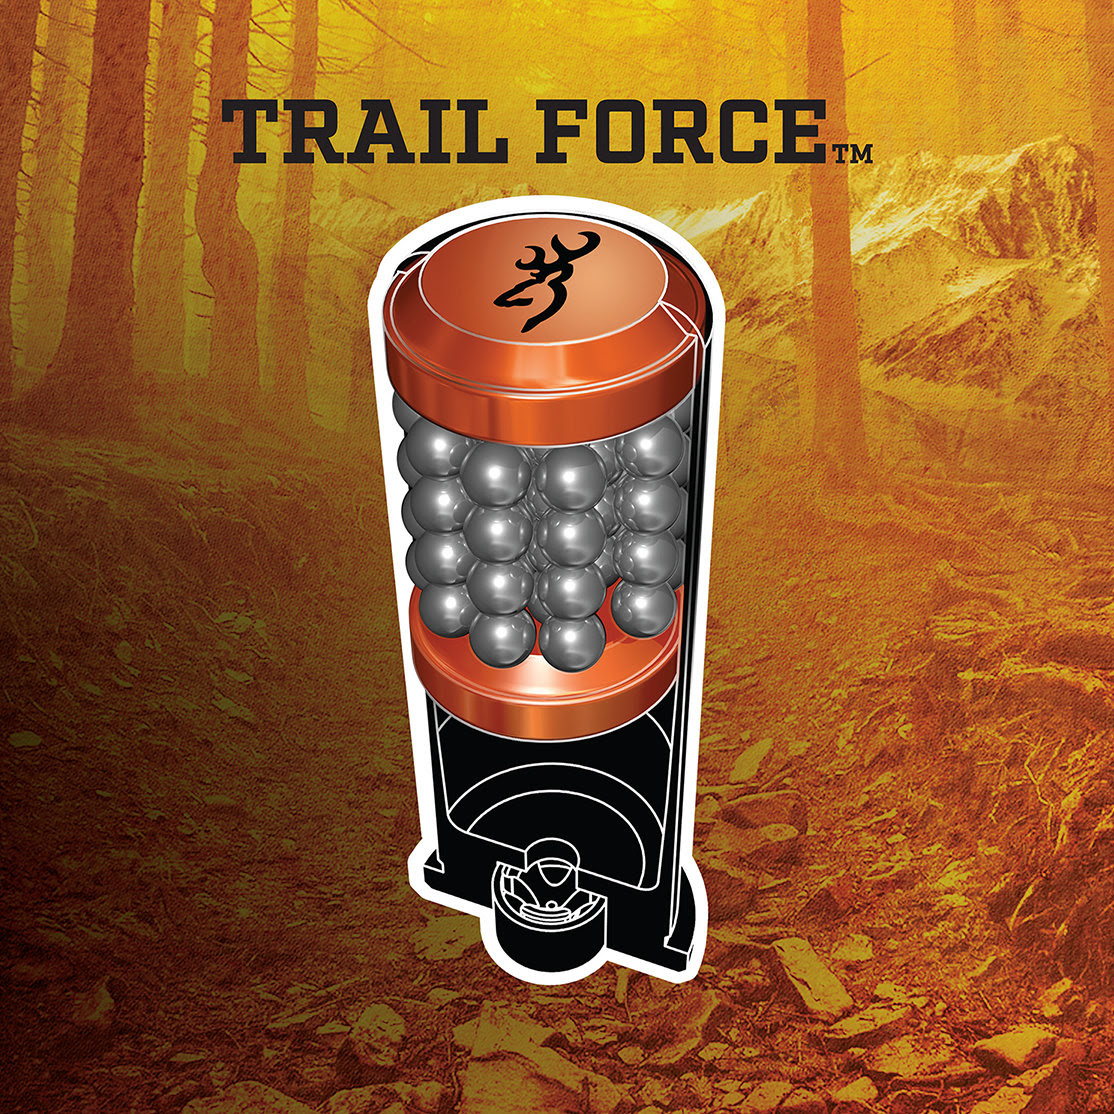 New Browning® Trail Force Ammunition, Pure Lethality on Pests